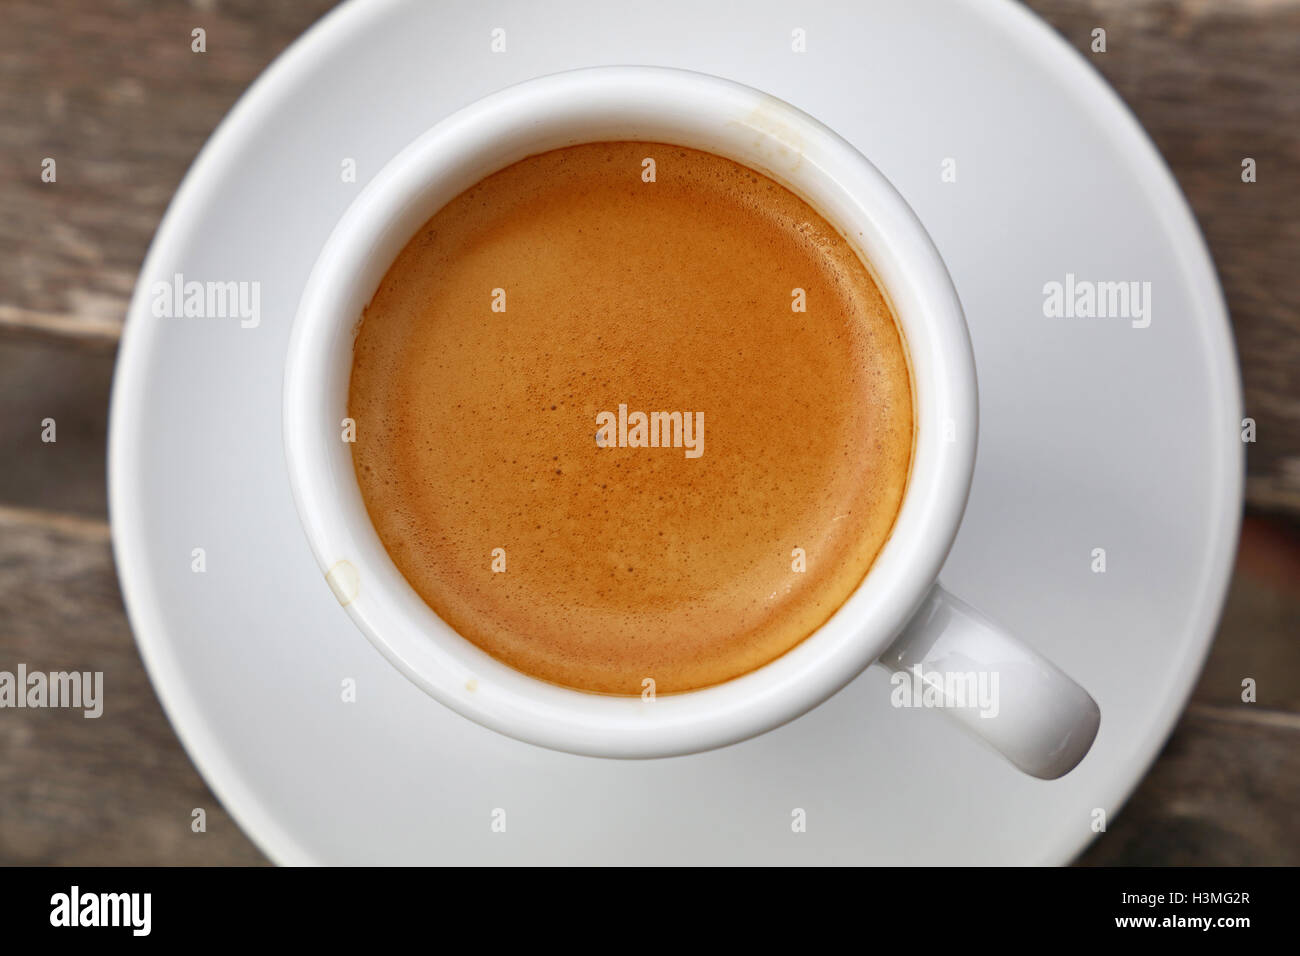 Espresso coffee shot brown crema froth in porcelain white cup with saucer  over wooden table, detail close up, elevated top view Stock Photo - Alamy